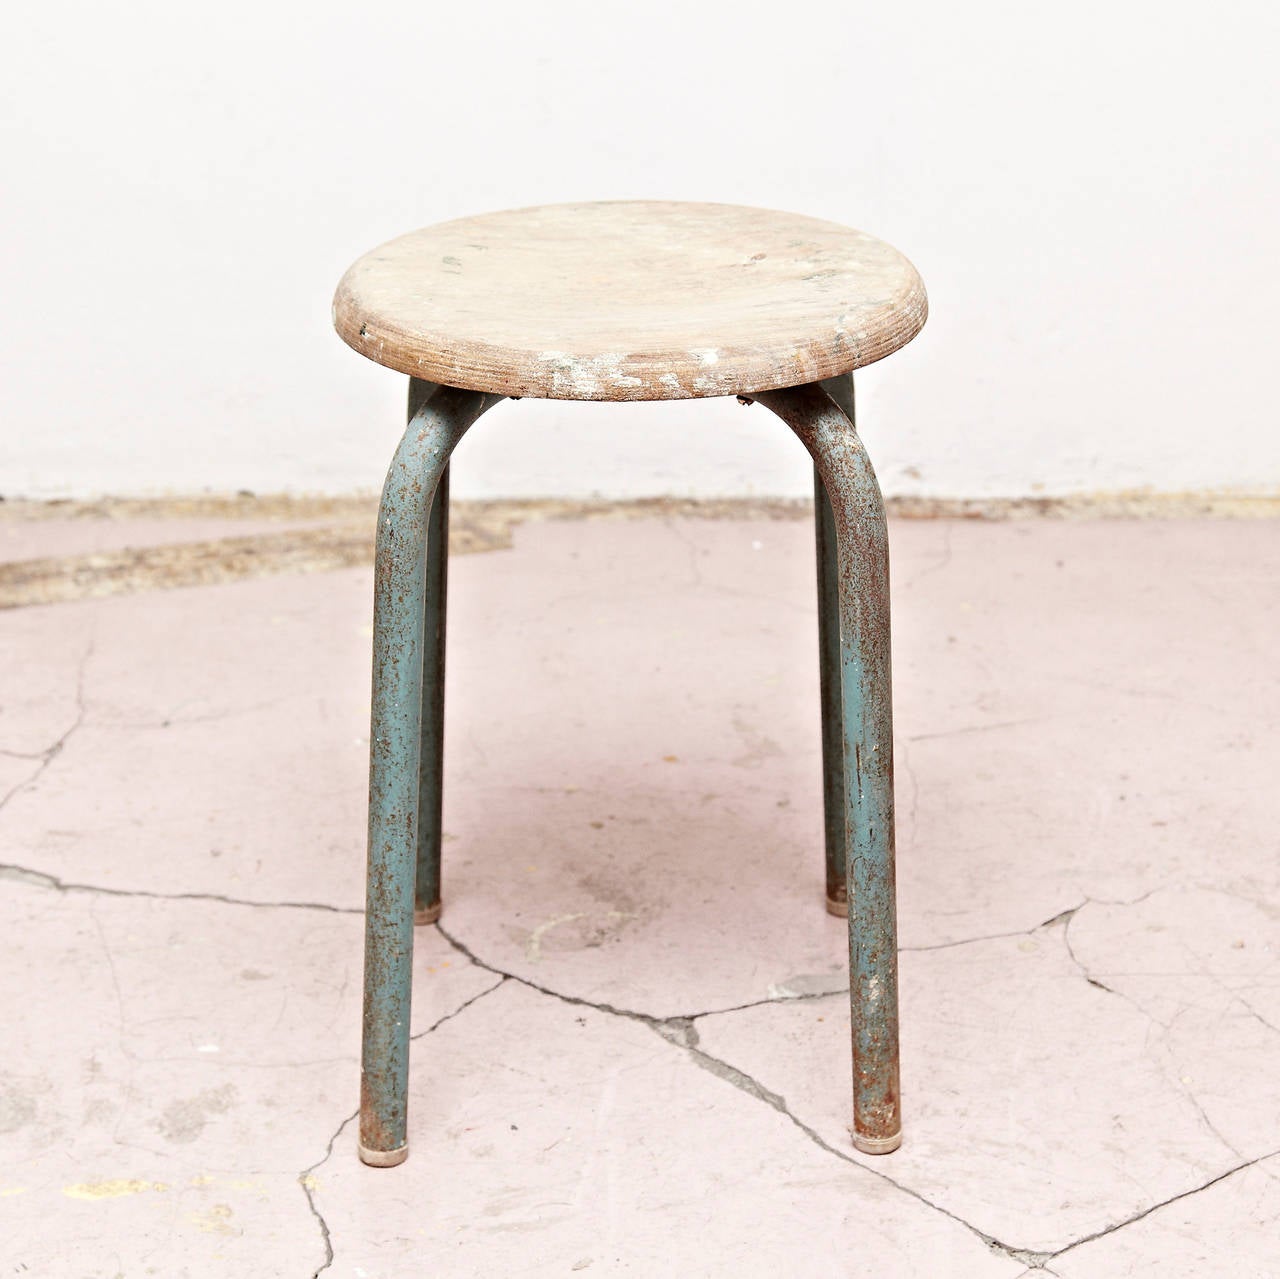 Stool design attributed to Jean Prouvé, circa 1950.
Manufactured in (France).
Lacquered metal base and laminated wood seat.

In good original condition, with minor wear consistent with age and use, preserving a beautiful patina.

.